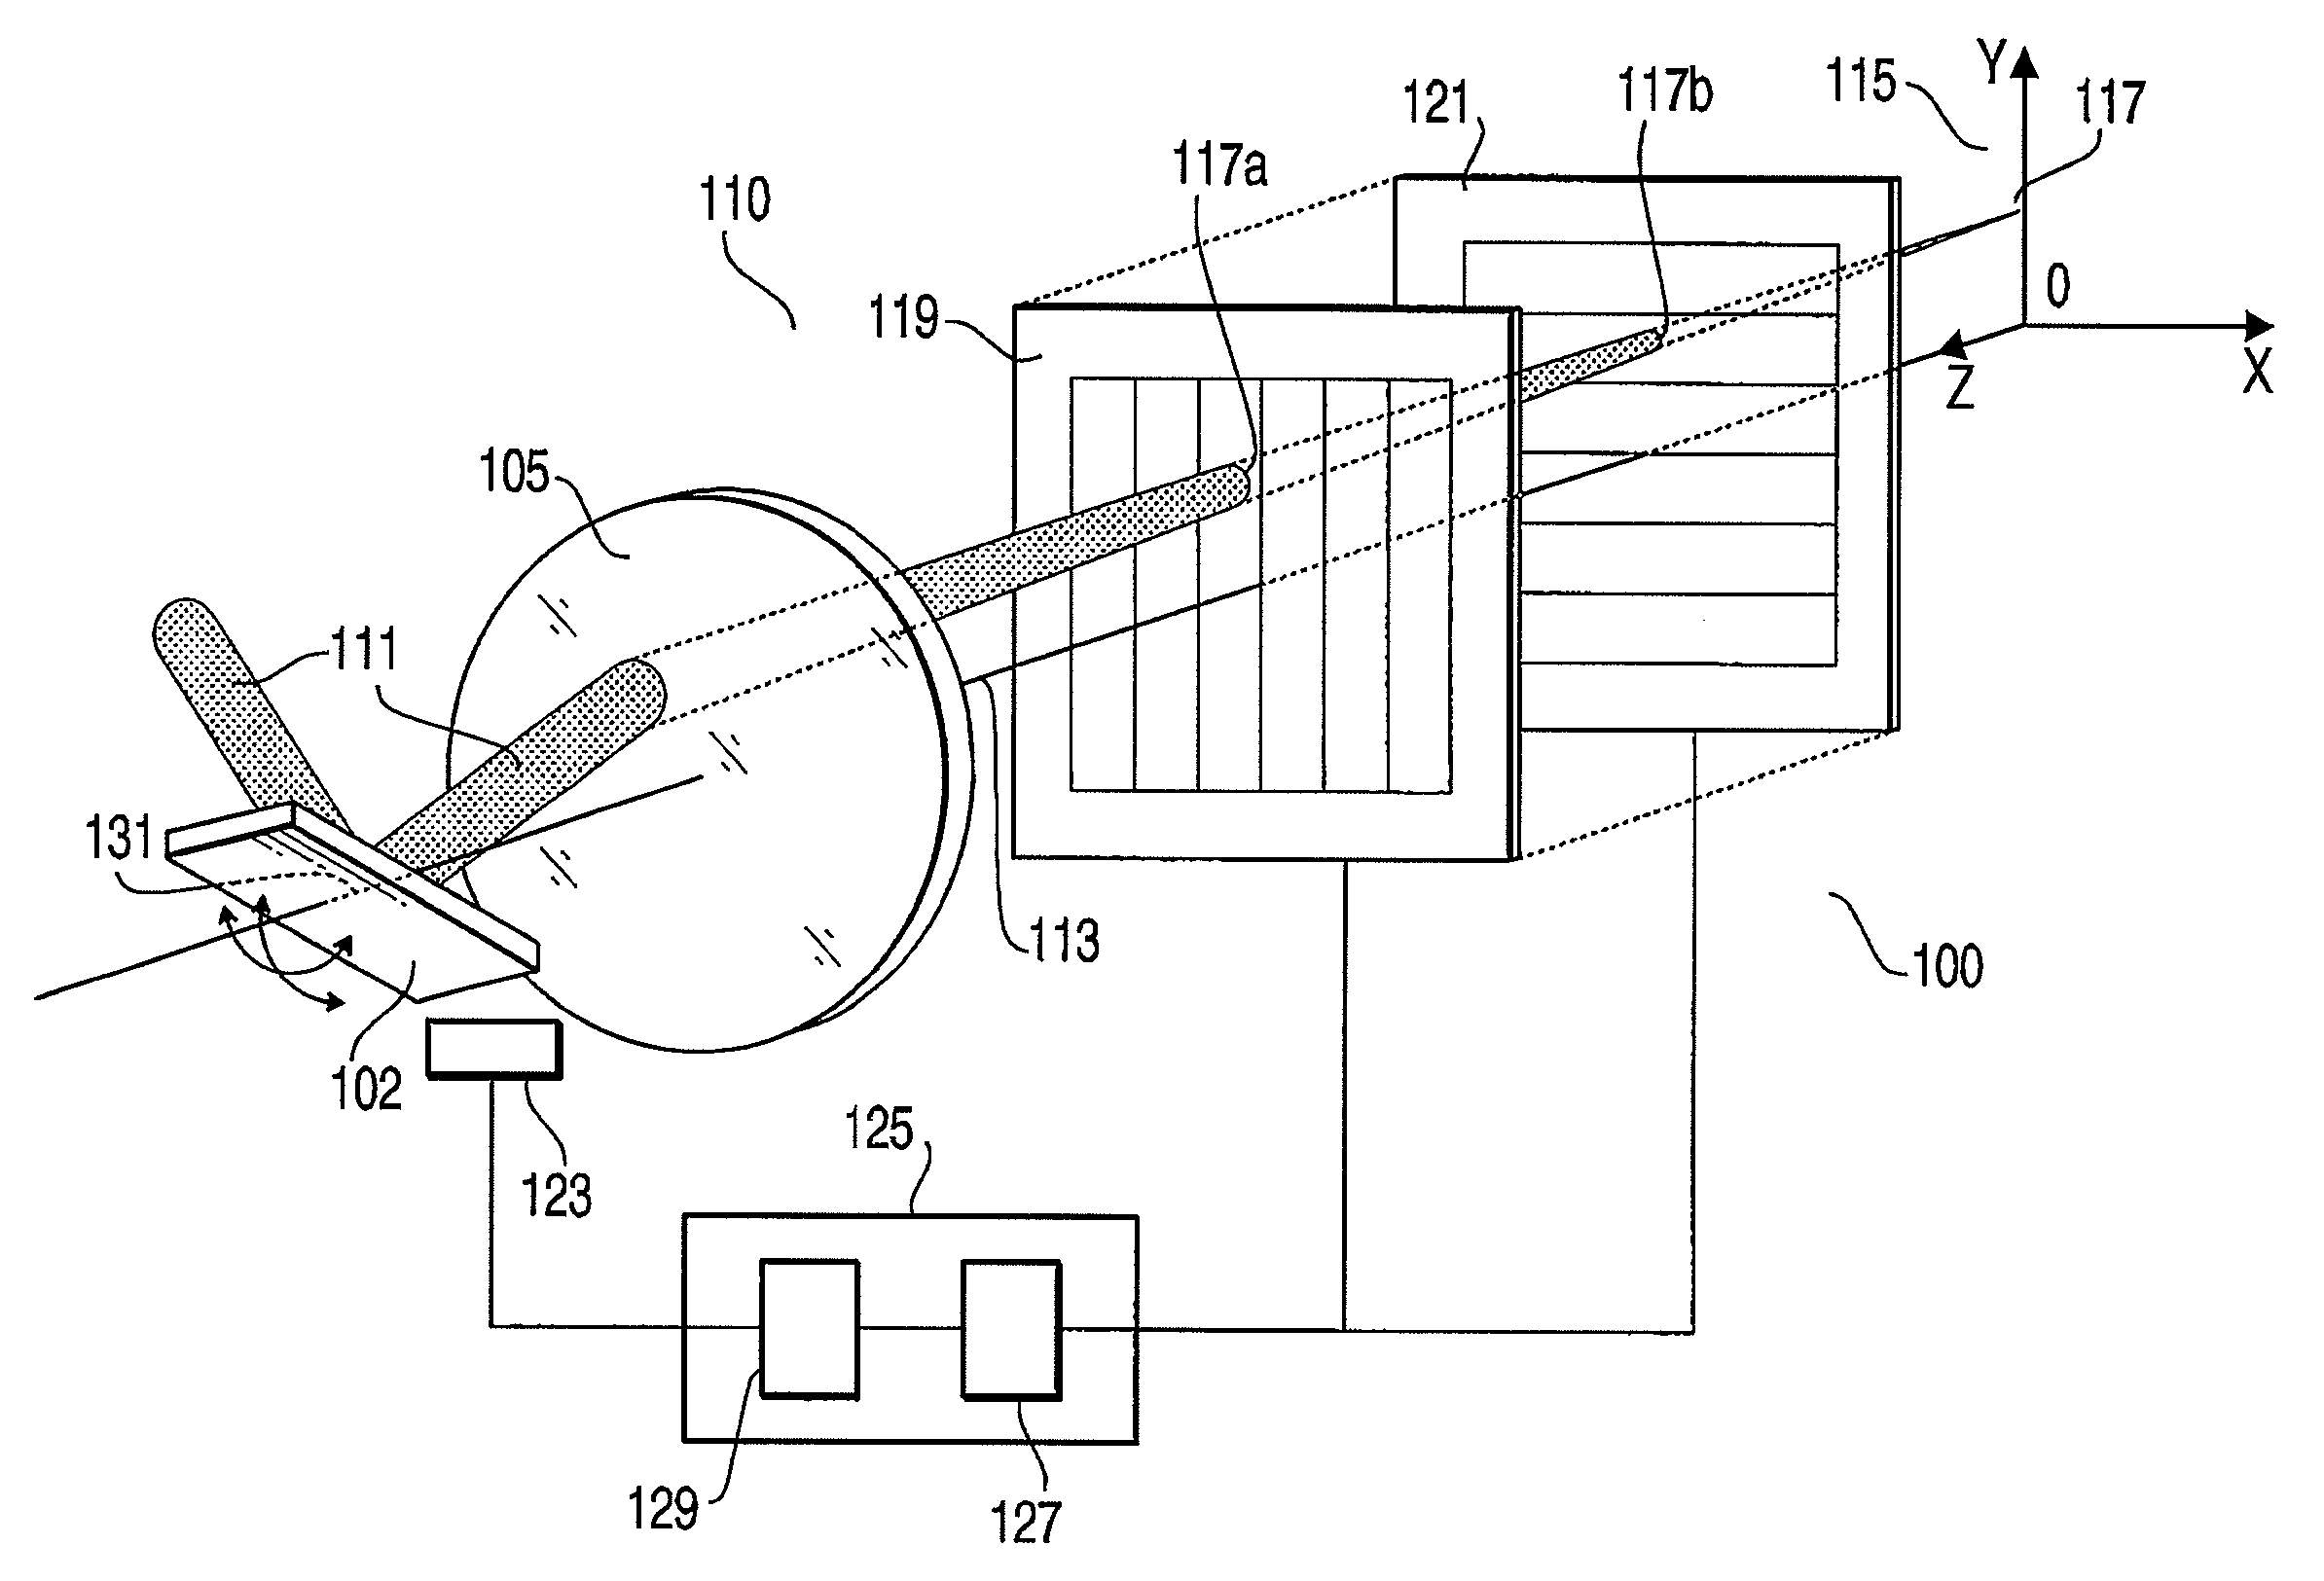 Optical scanner device